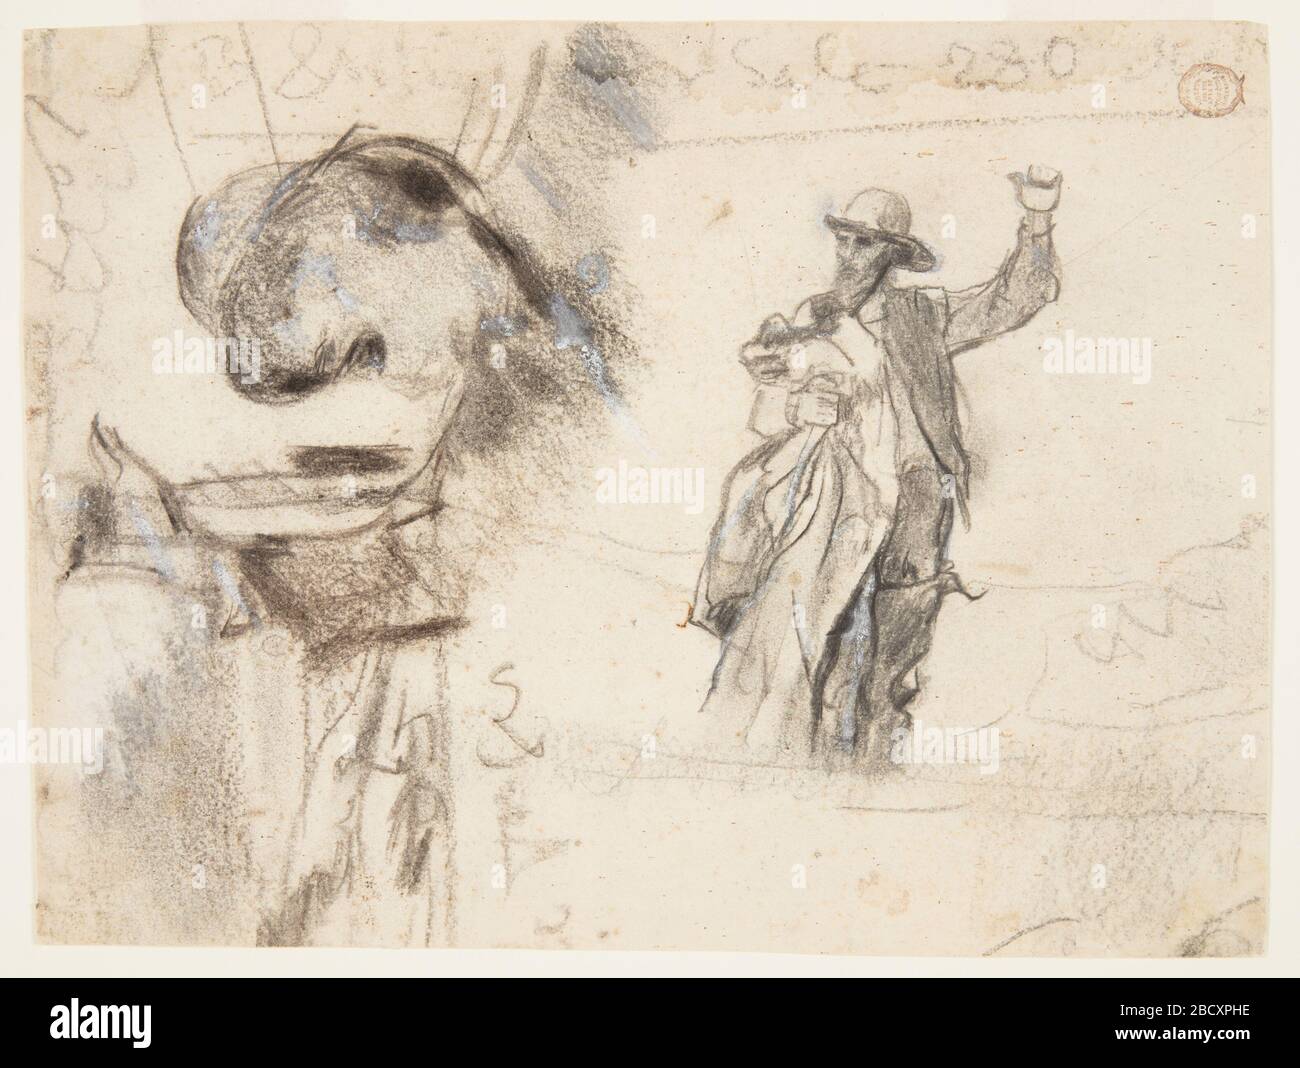 Two Studies of a Sailor with Raised Arm Studies for The LookoutAlls Well and The Wreck. Sketch of the head and shoulders of sailor, wearing a wide-brimmed hat and holding a coat (a sou'wester), at right. Another sailor, nearly full-length, with left arm raised, is shown wearing rain hat and yelling. A sketch of clouds and sea appears at left. Two Studies of a Sailor with Raised Arm Studies for The LookoutAlls Well and The Wreck Stock Photo